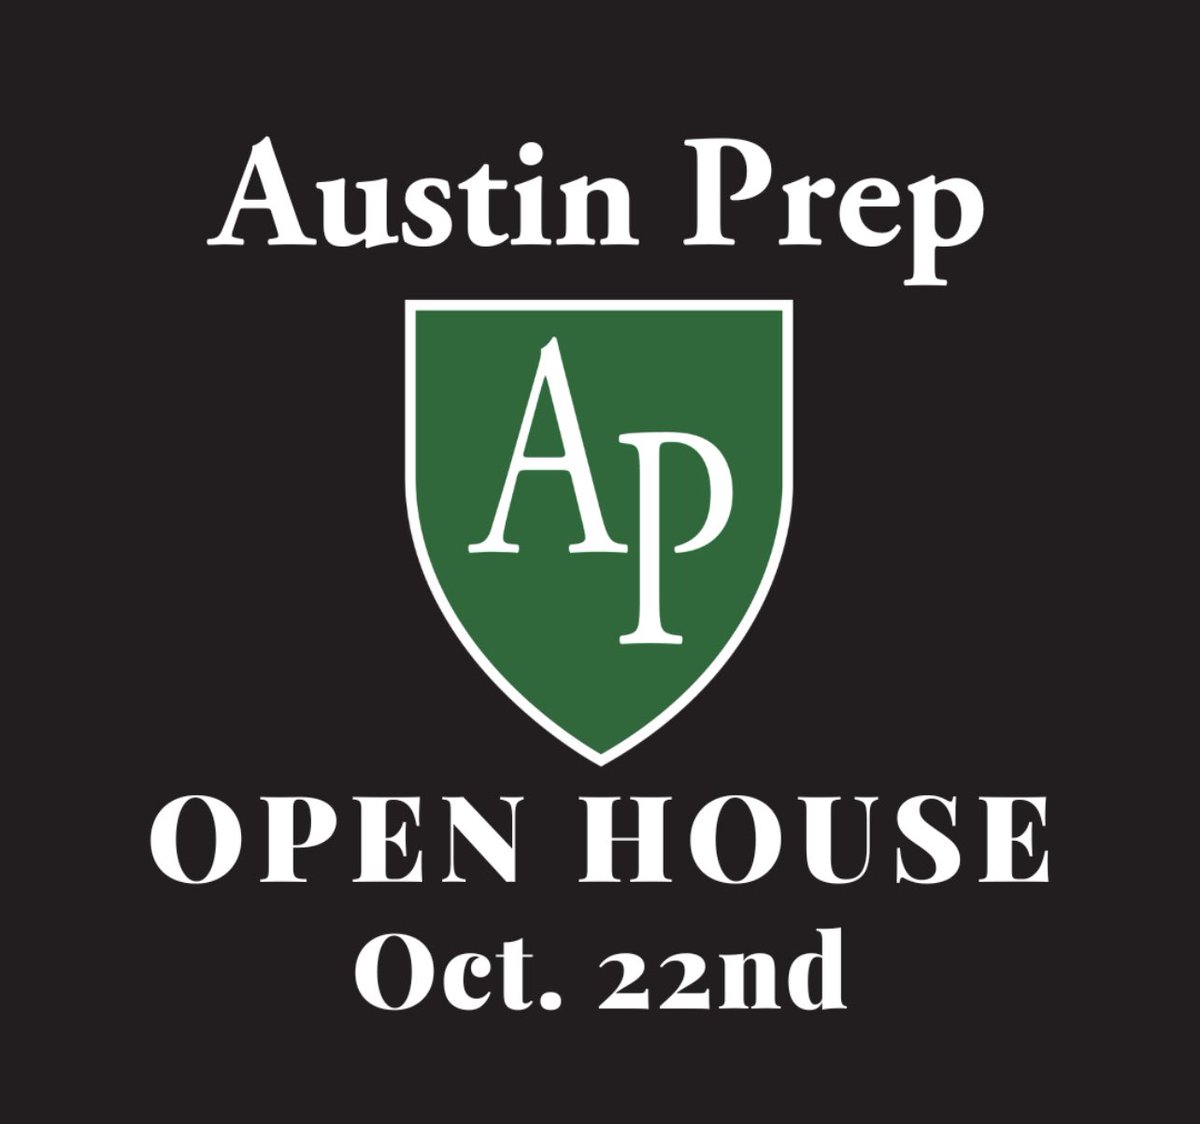 Come join us and learn all about the AP journey!